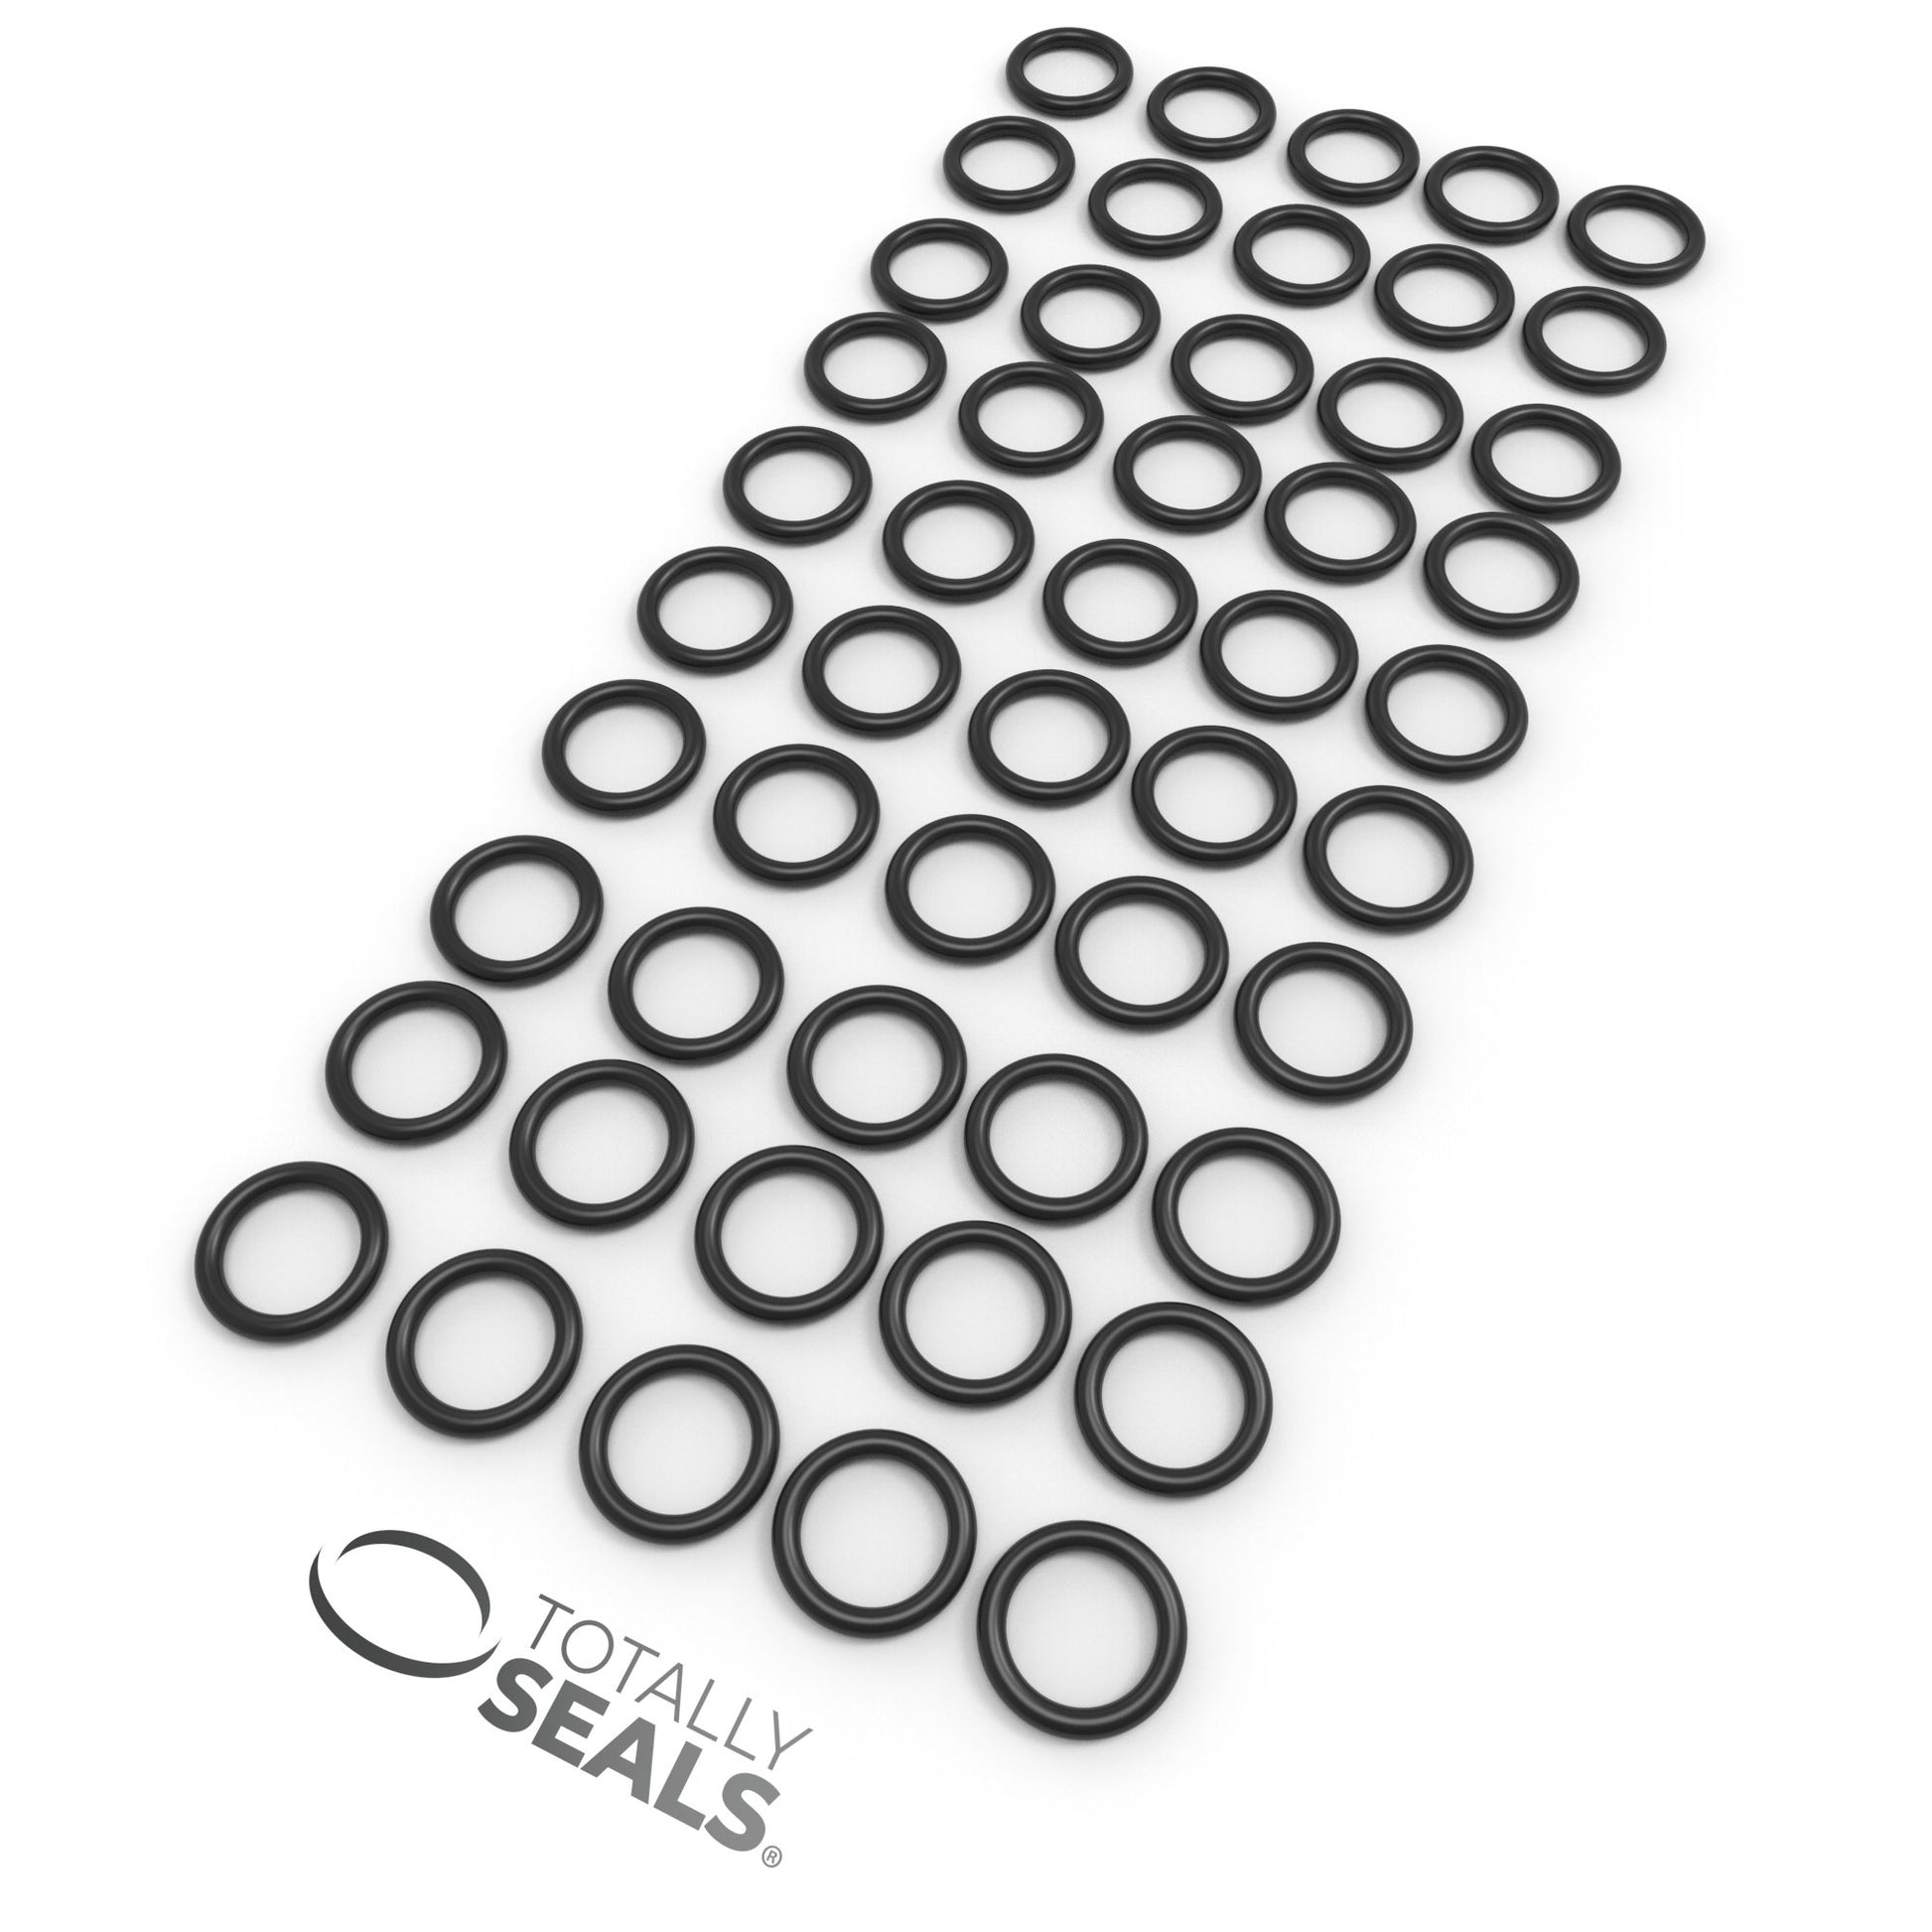 1 1/2" x 3/16" (BS325) Imperial Nitrile Rubber O-Rings - Totally Seals®